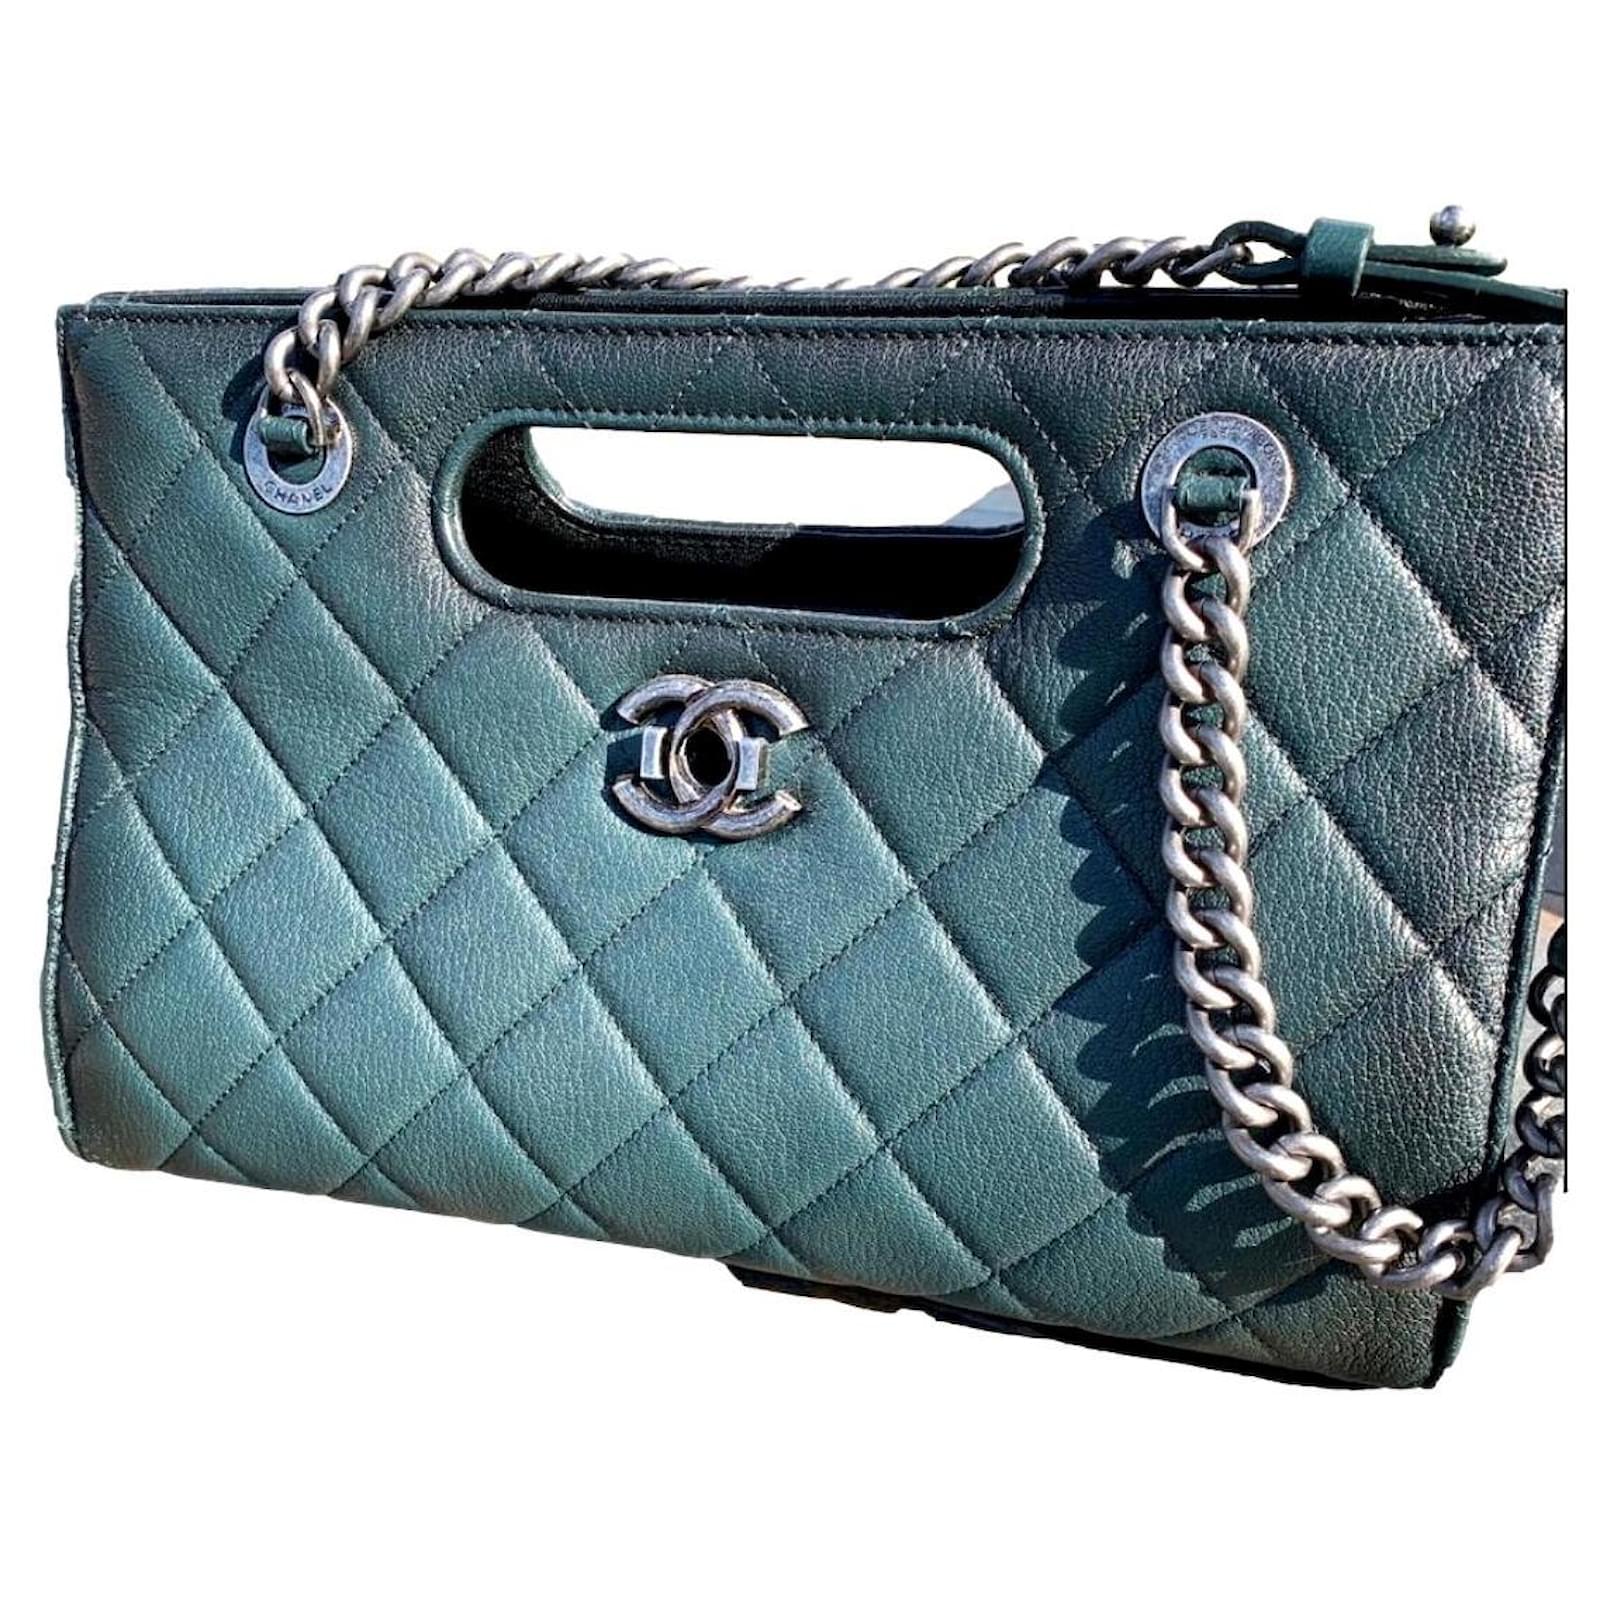 quilted handbags for women chanel like